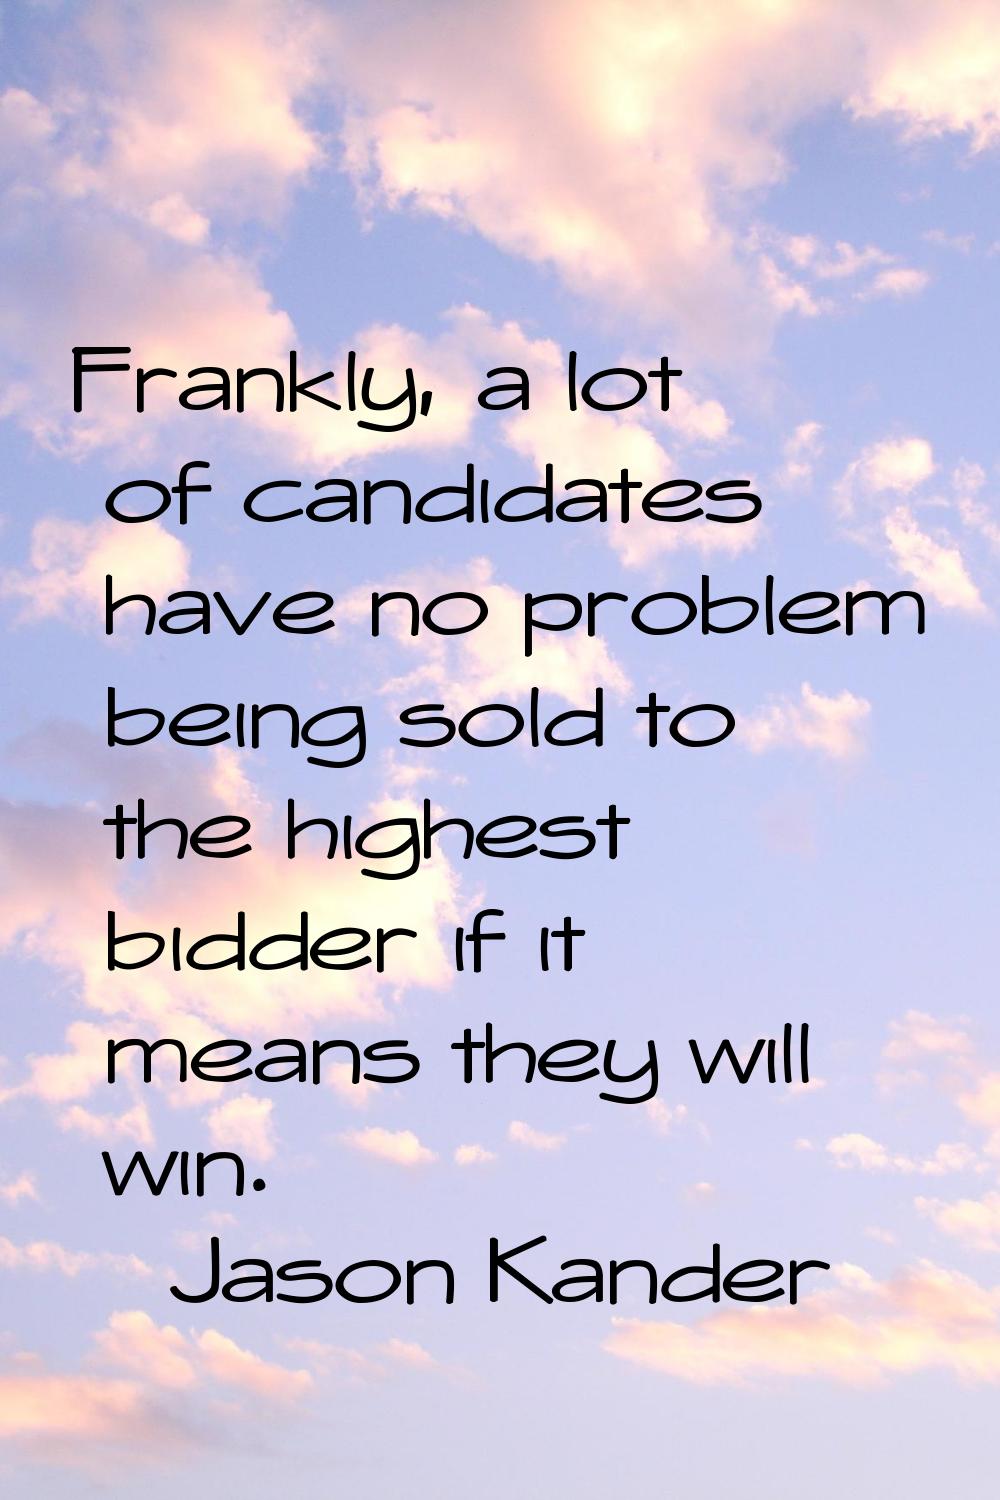 Frankly, a lot of candidates have no problem being sold to the highest bidder if it means they will